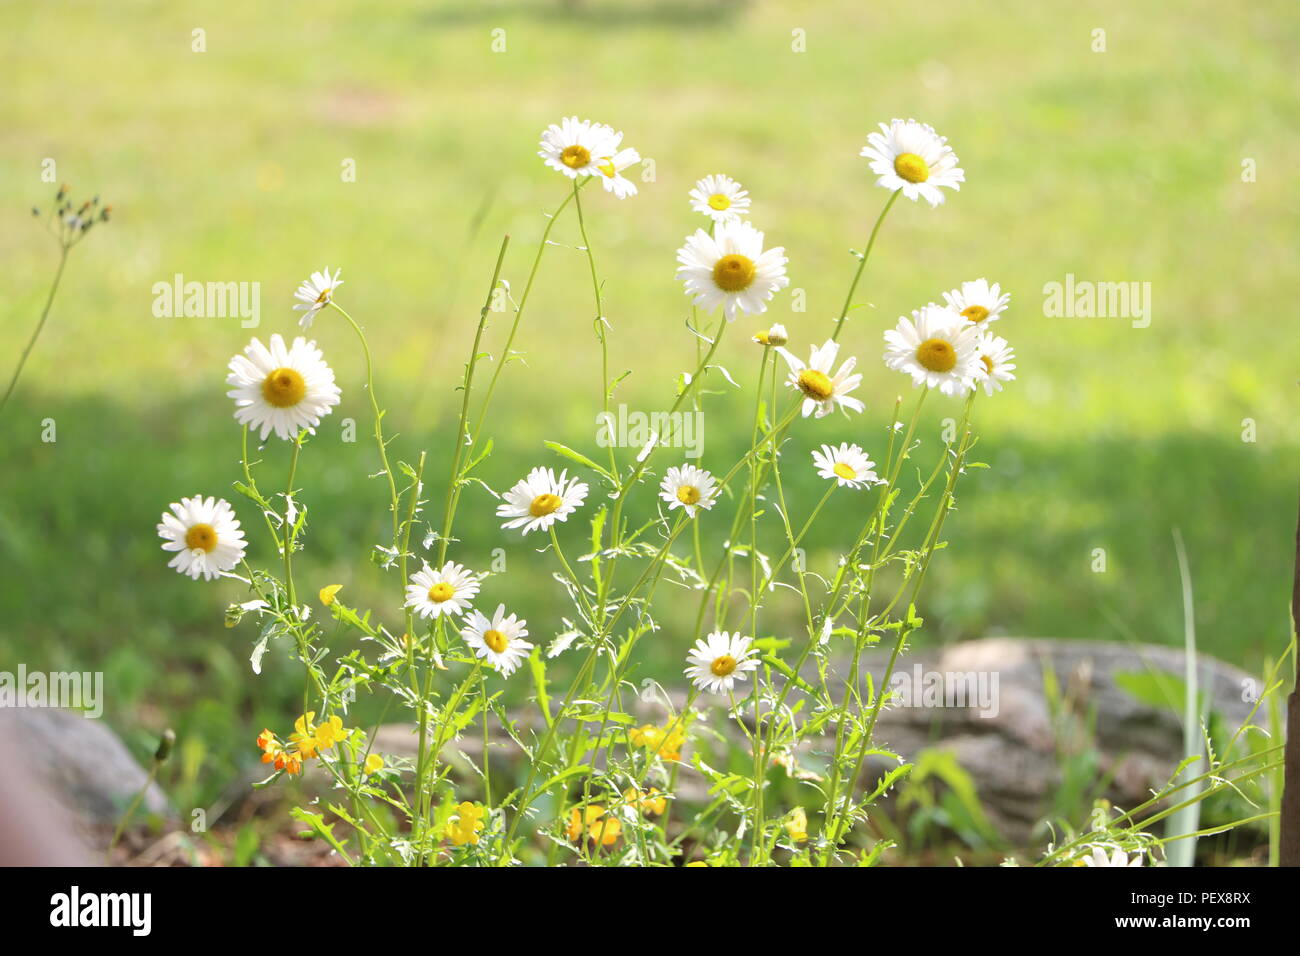 Daisies surrounded by rocks and grass. Blurred grassy background makes the focus on the flowers pop. Stock Photo